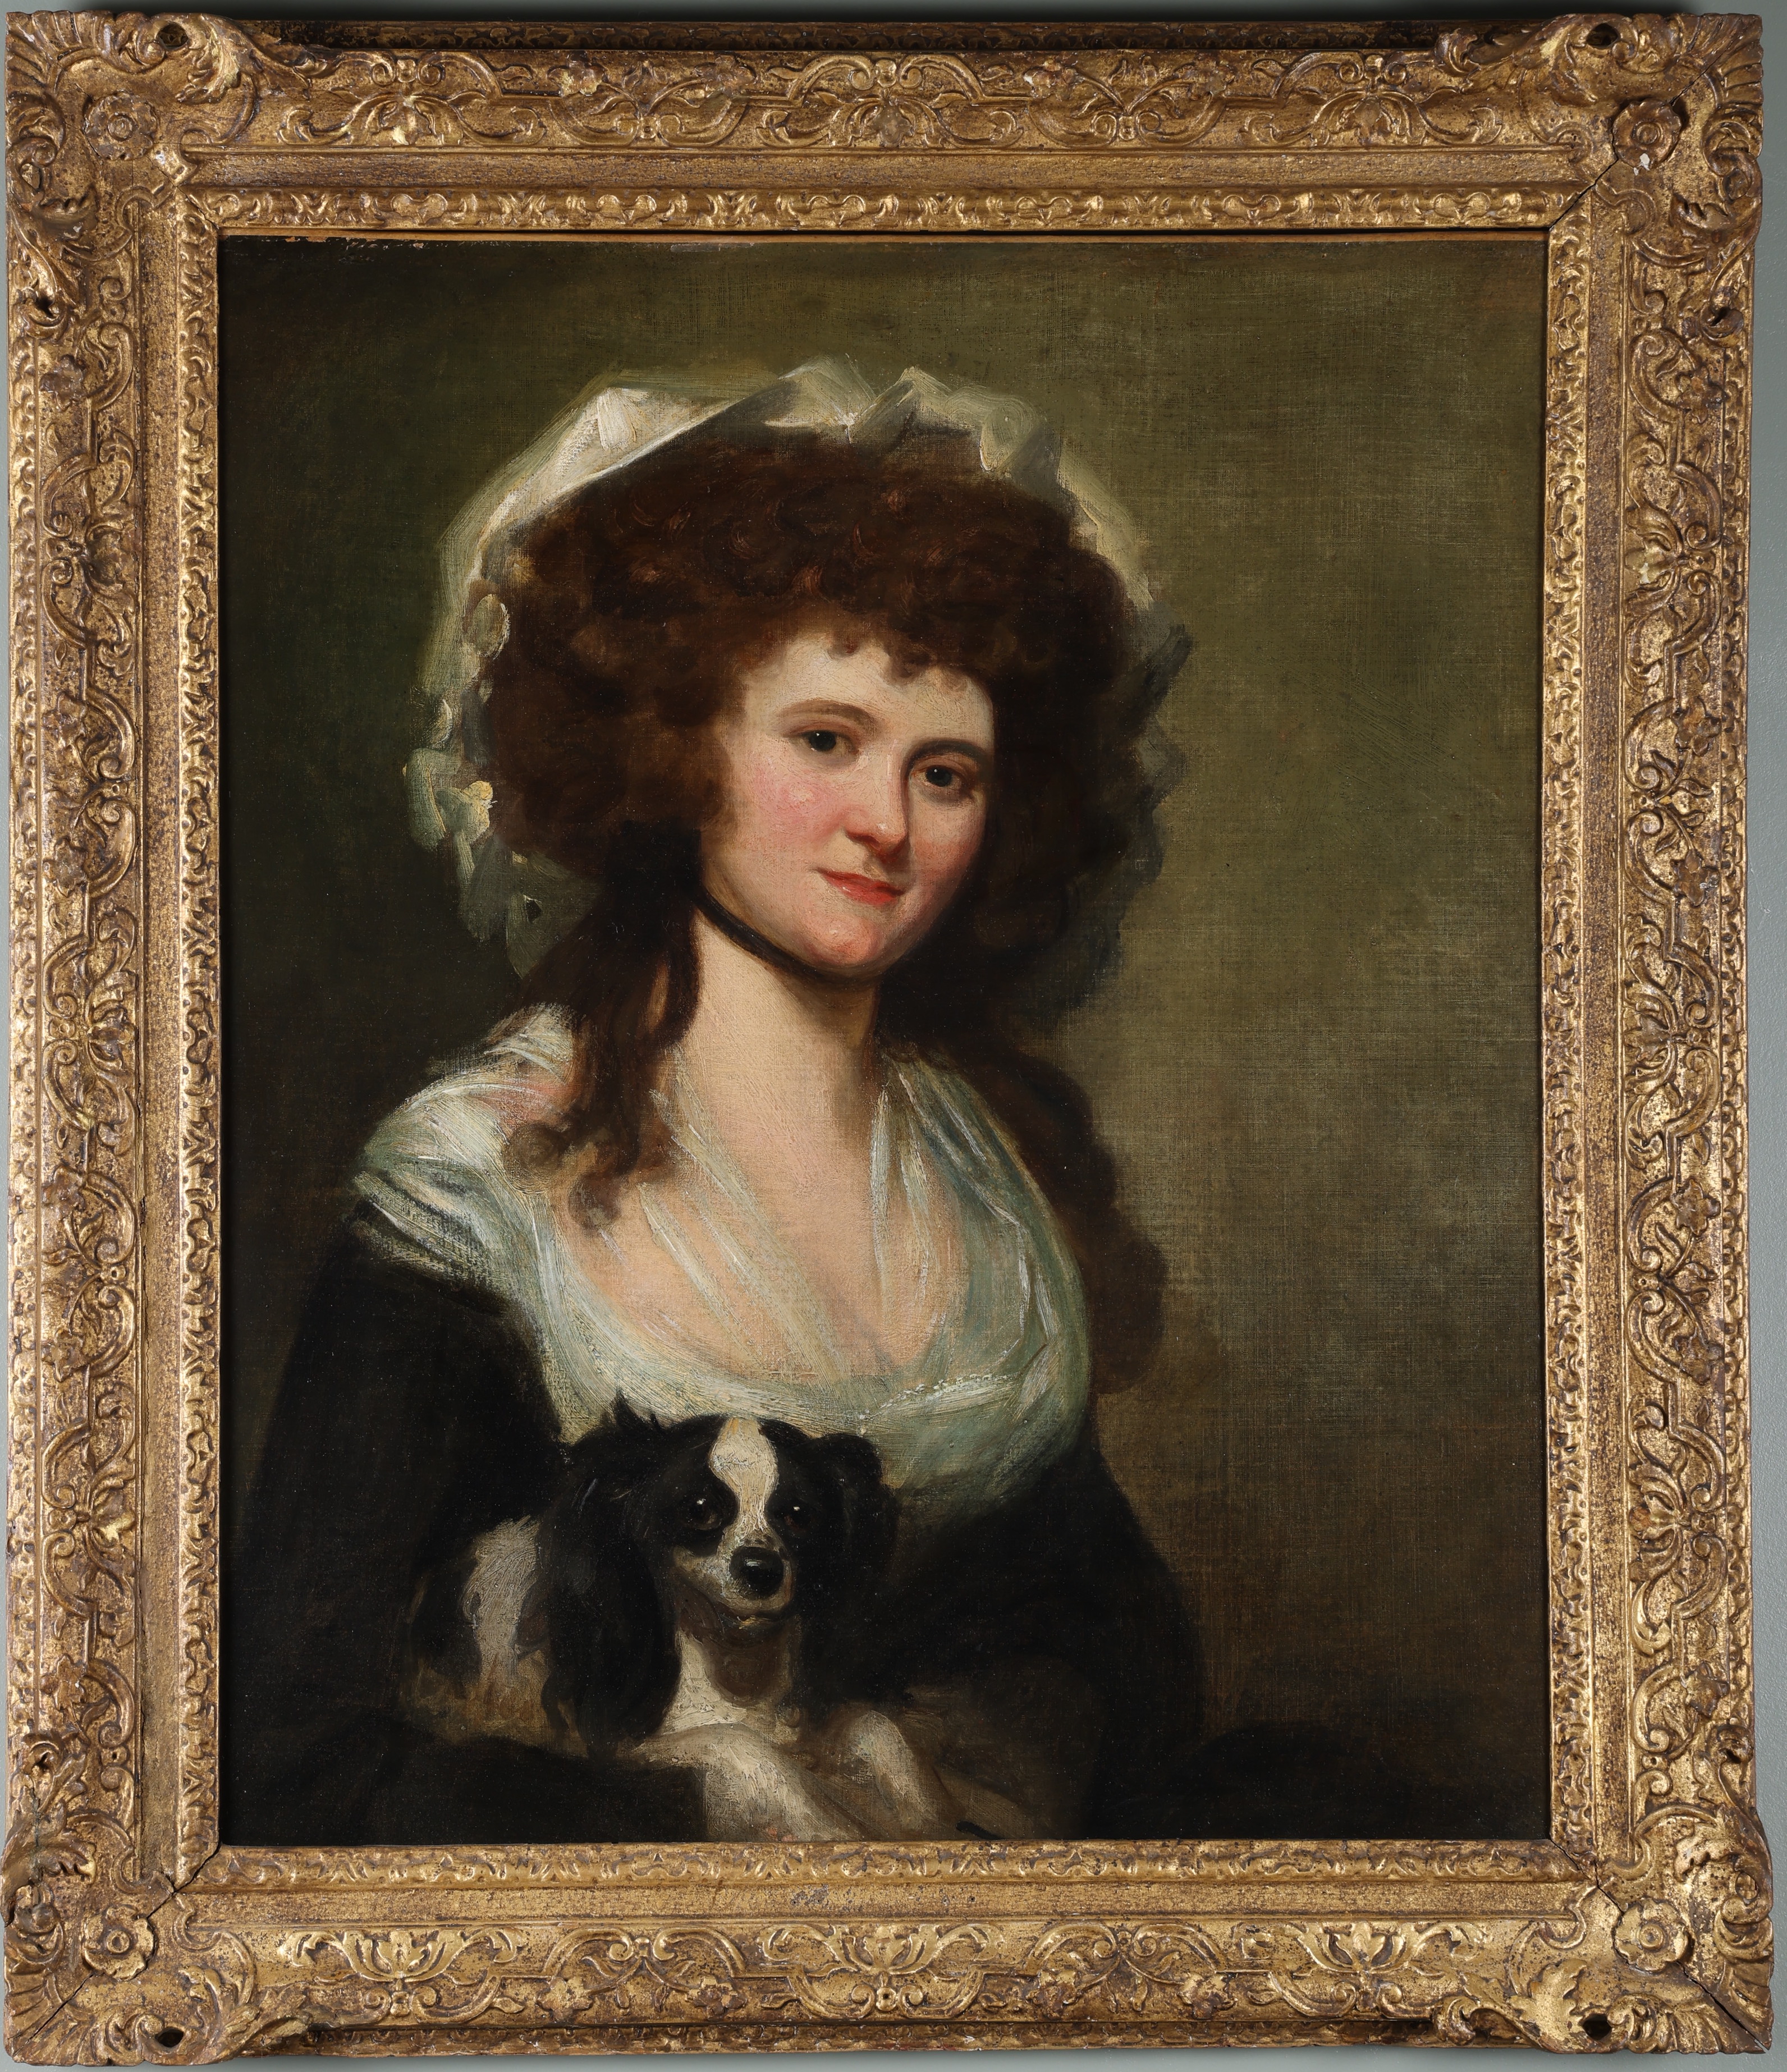 Attributed to Mather Brown (1761-1831), Portrait of a young lady with King Charles Cavalier